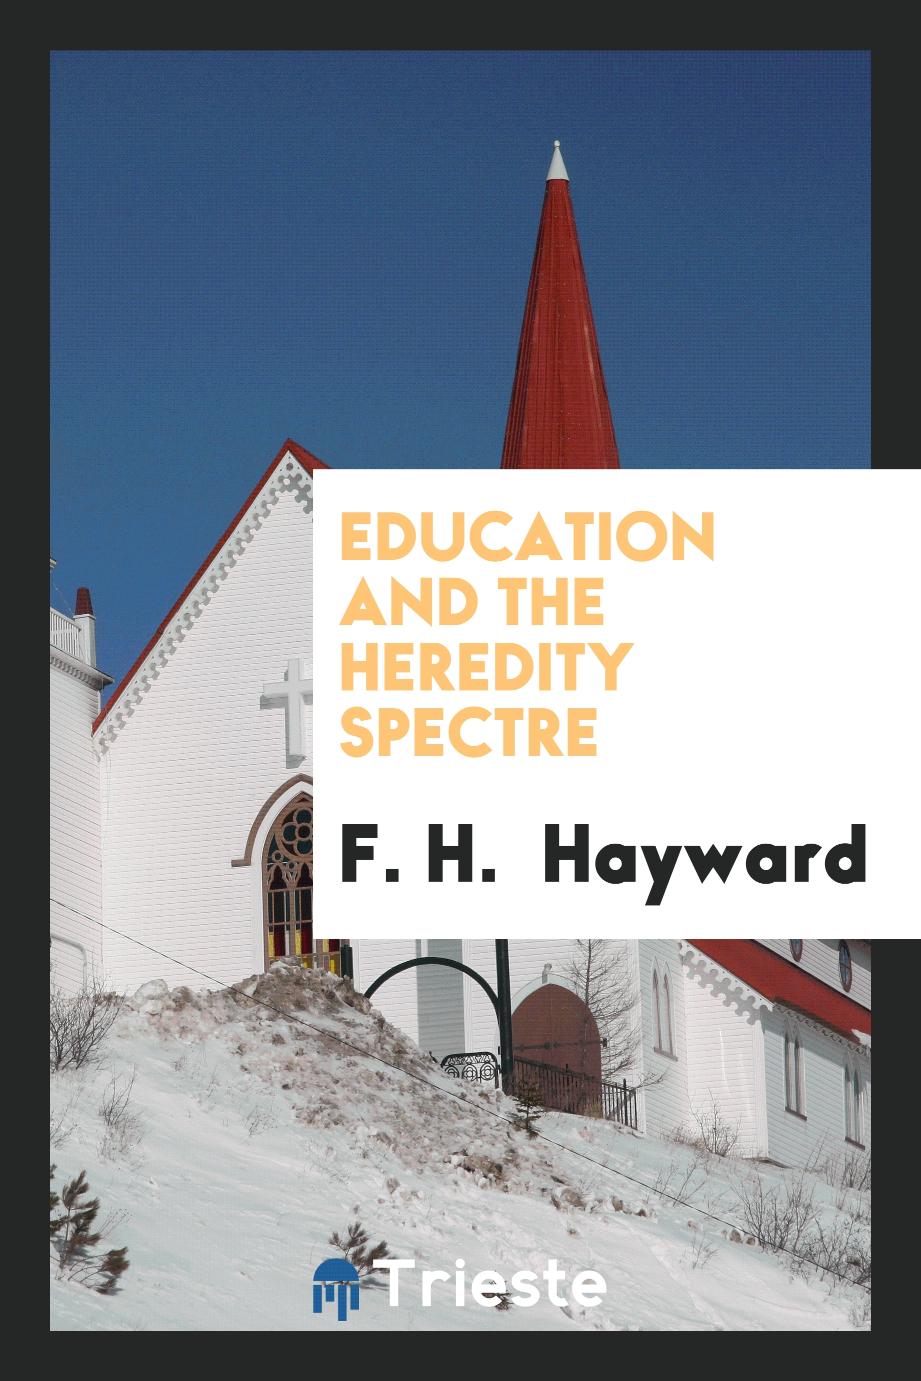 Education and the Heredity Spectre